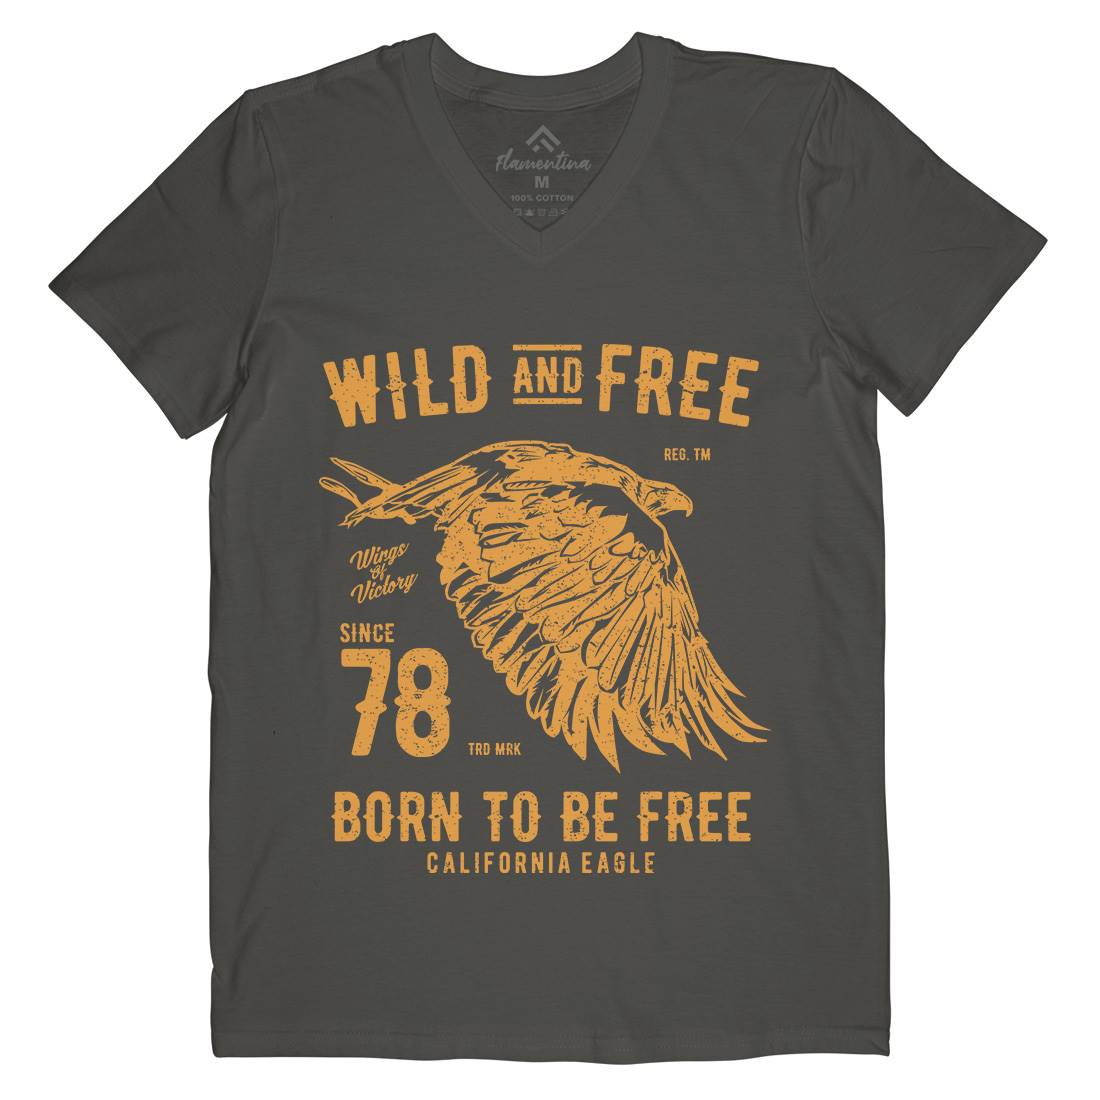 Wild And Free Mens V-Neck T-Shirt Army A792